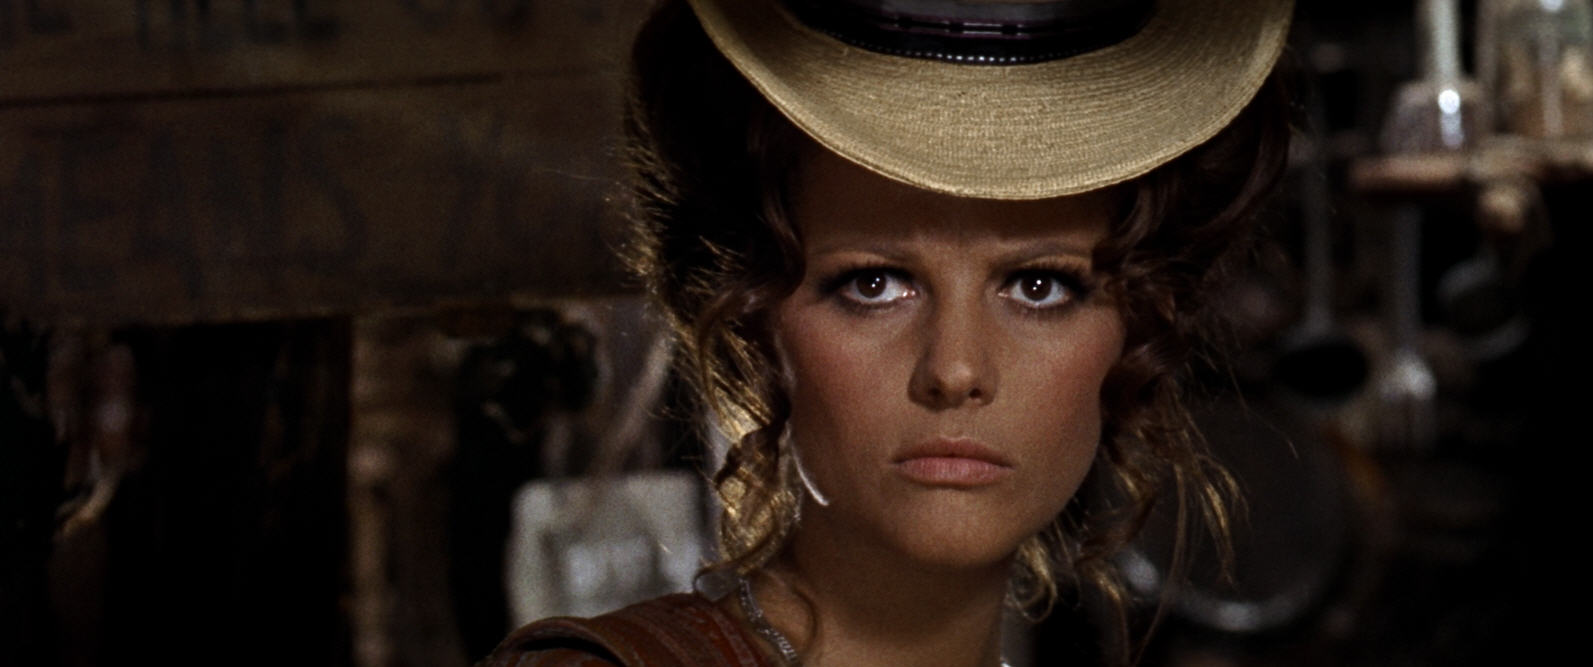 The Signal Watch: Spaghetti Watch-tern: Once Upon a Time in the West (1968)